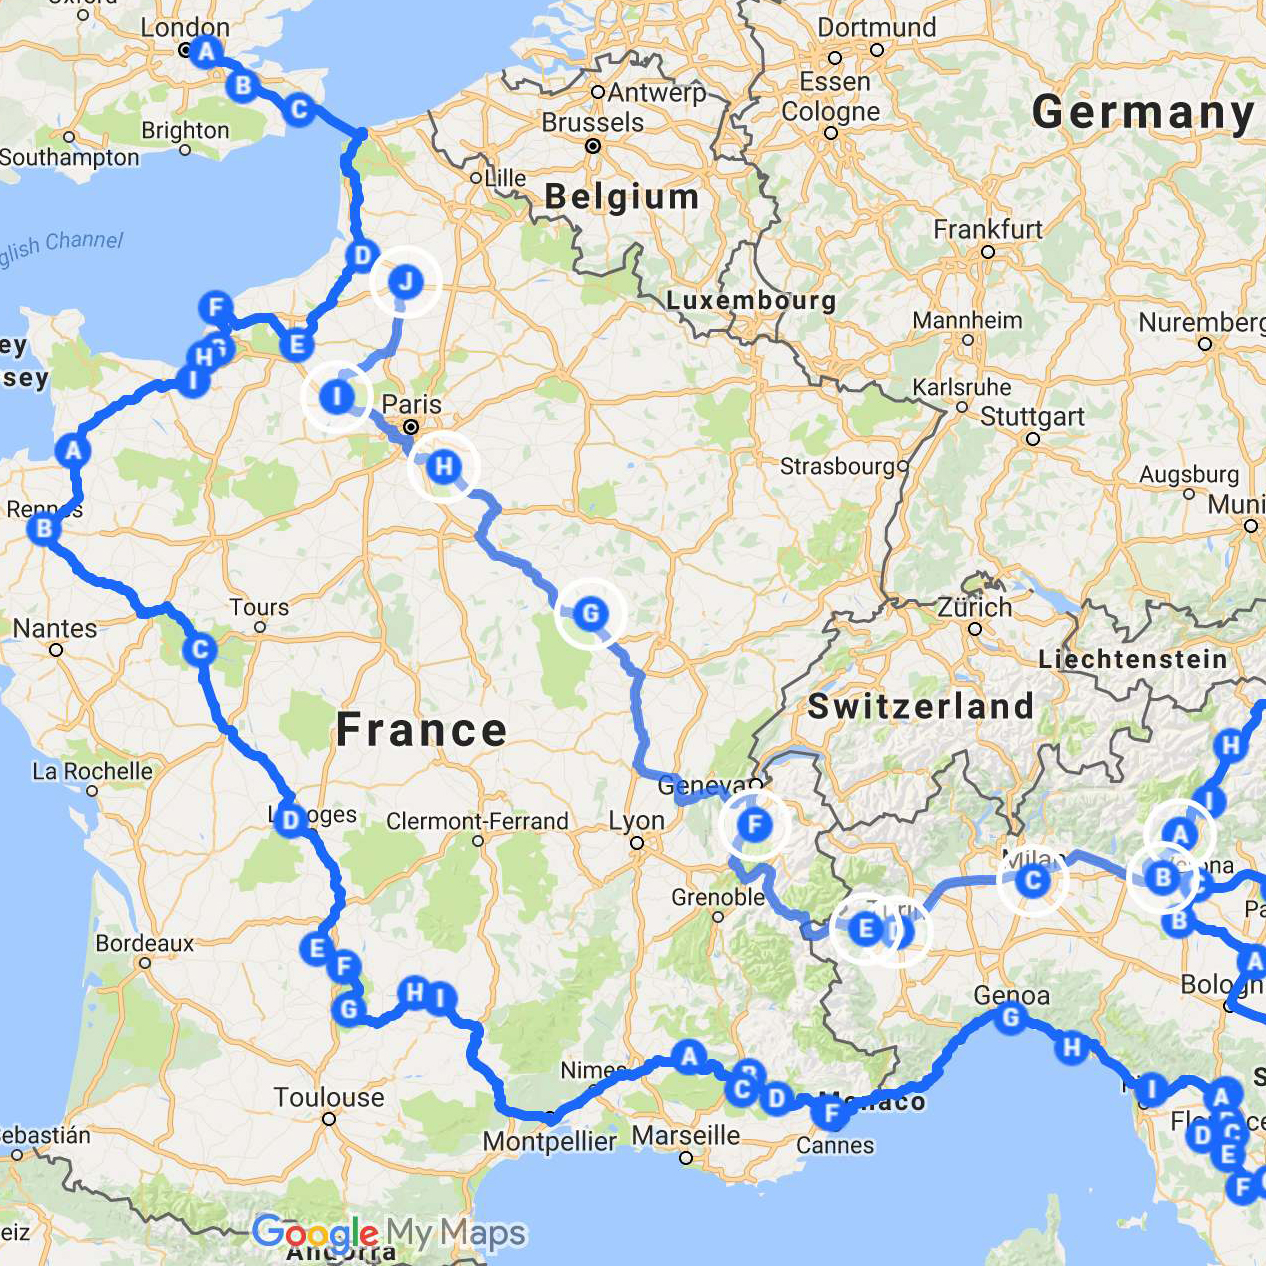 France/Italy roadtrip – back to the UK